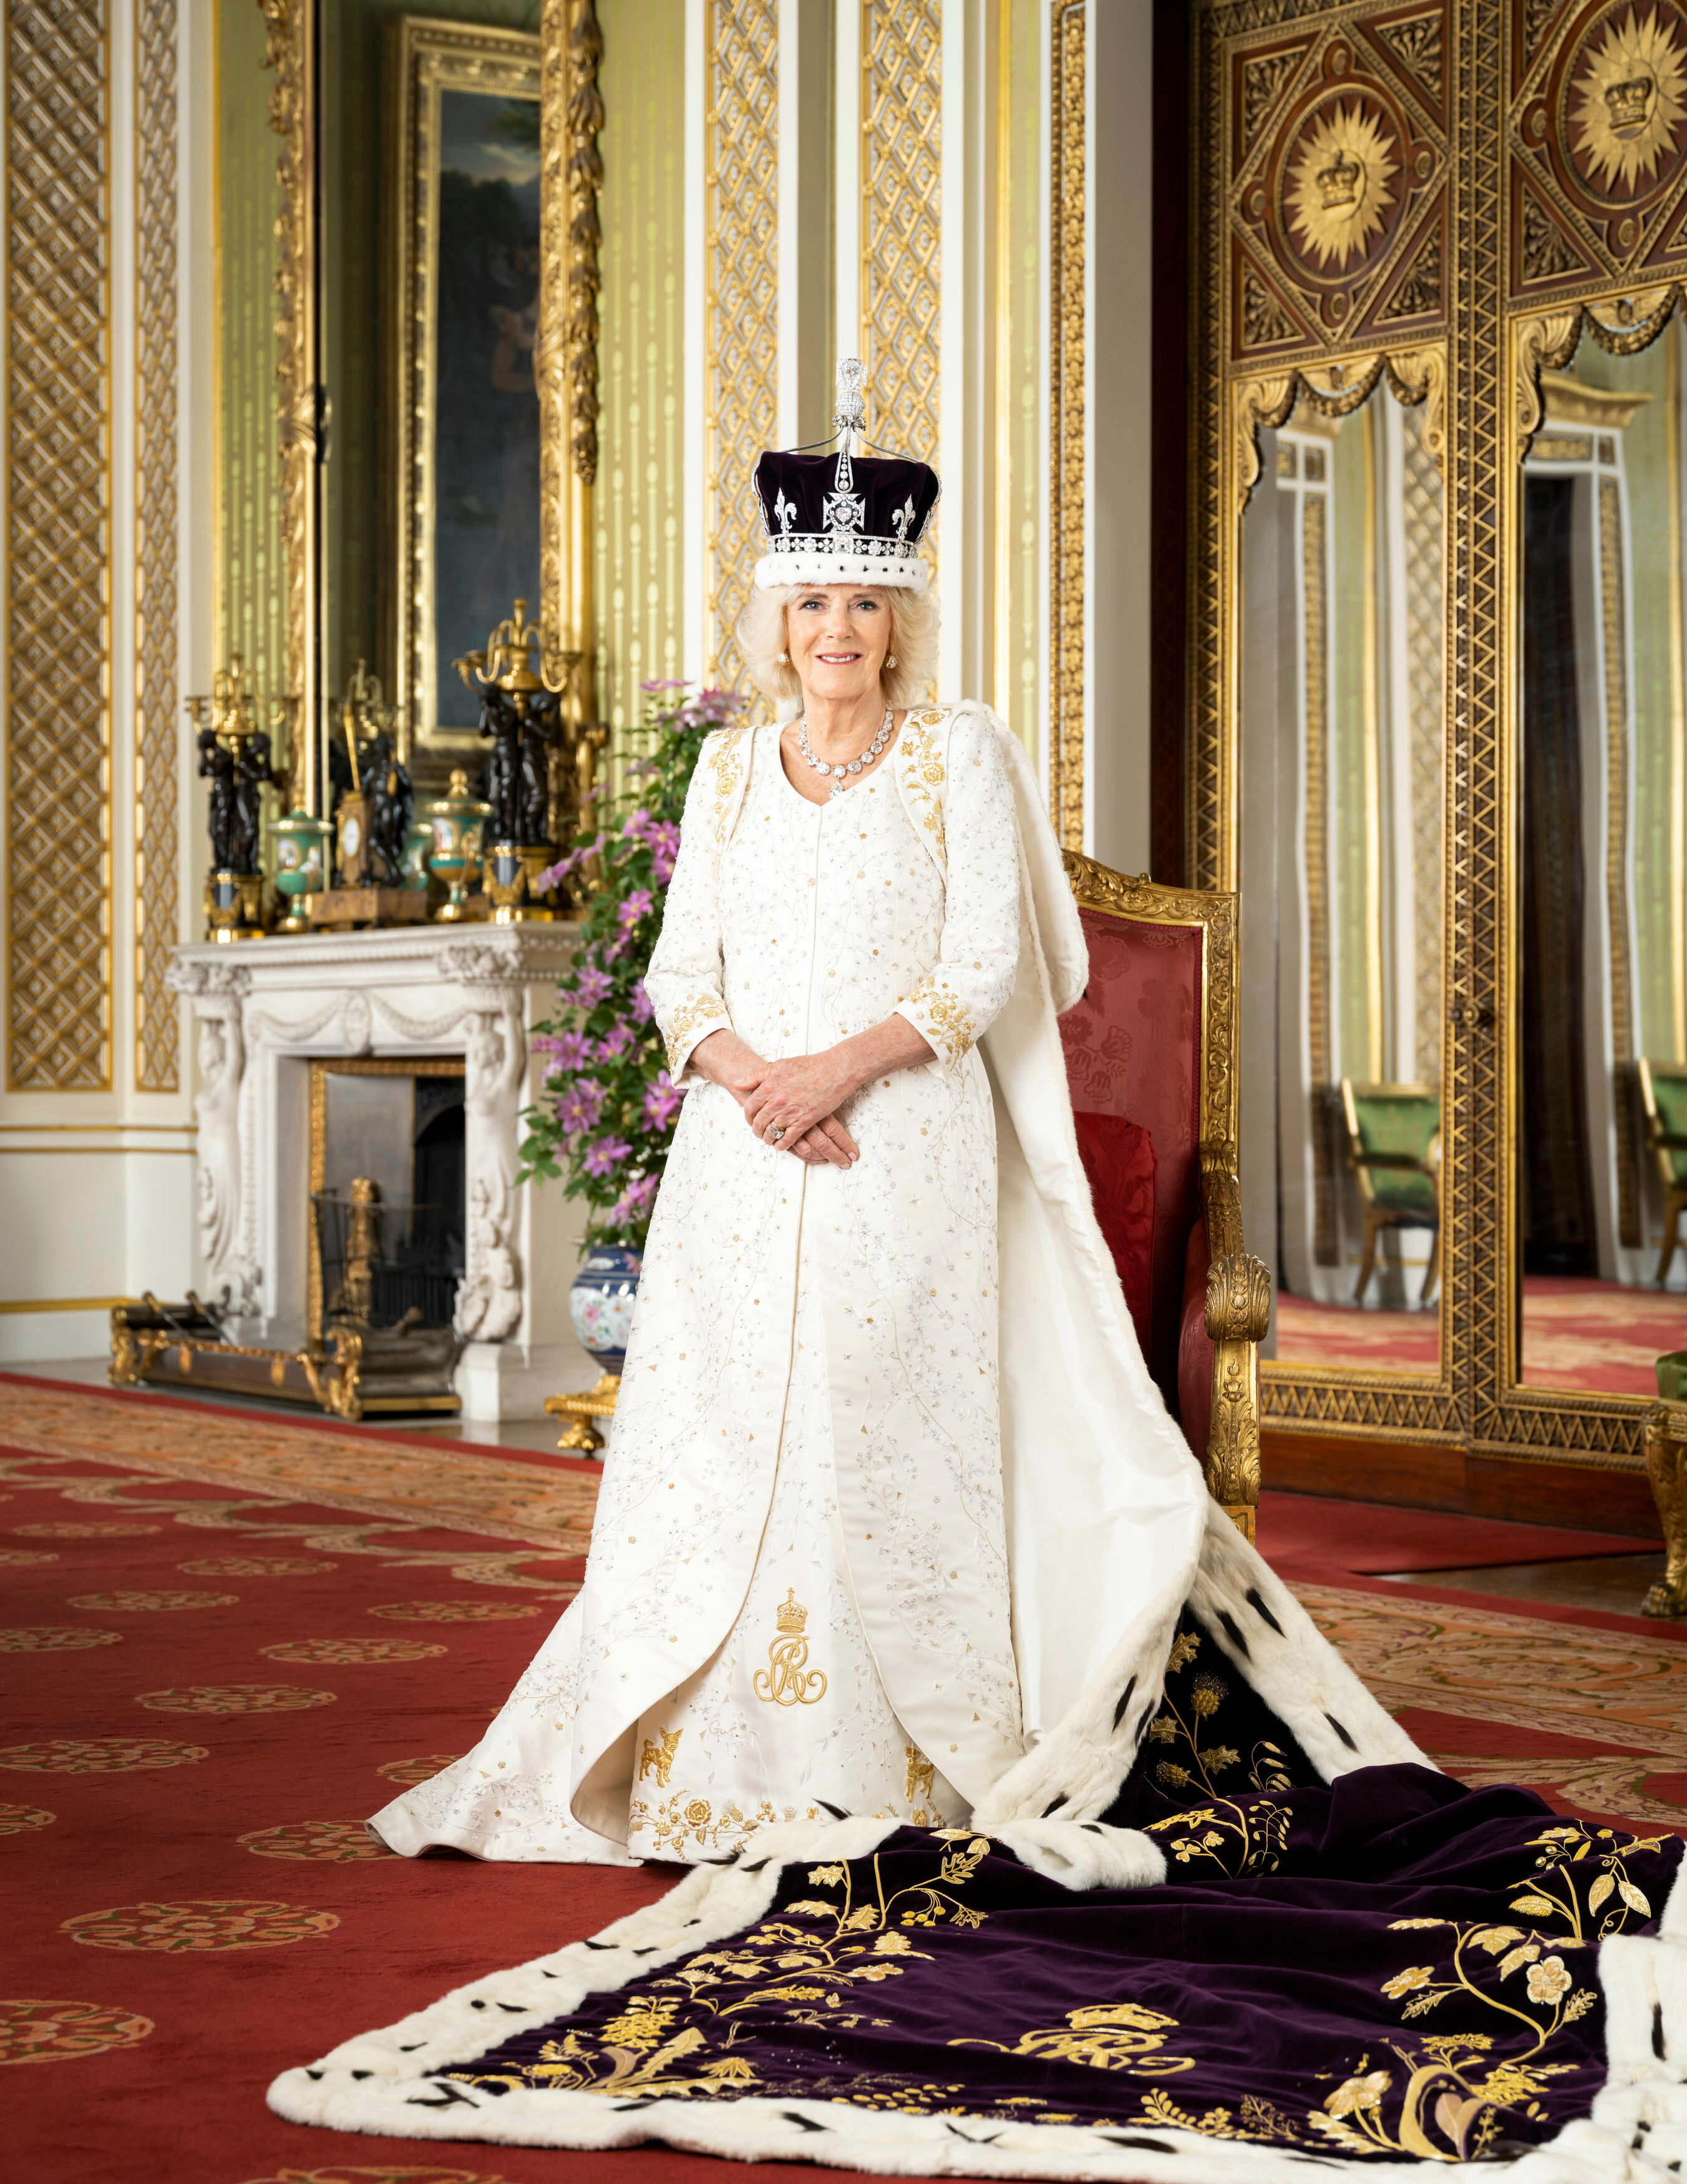 <p>Queen Camilla is pictured in the Green Drawing Room of Buckingham Palace in London wearing Queen Mary's Crown and Robe of Estate in this official <a href="https://www.wonderwall.com/celebrity/the-coronation-of-king-charles-iii-and-queen-camilla-the-best-pictures-of-all-the-royals-at-this-historic-event-735015.gallery">coronation</a> portrait released on May 8, 2023. </p>